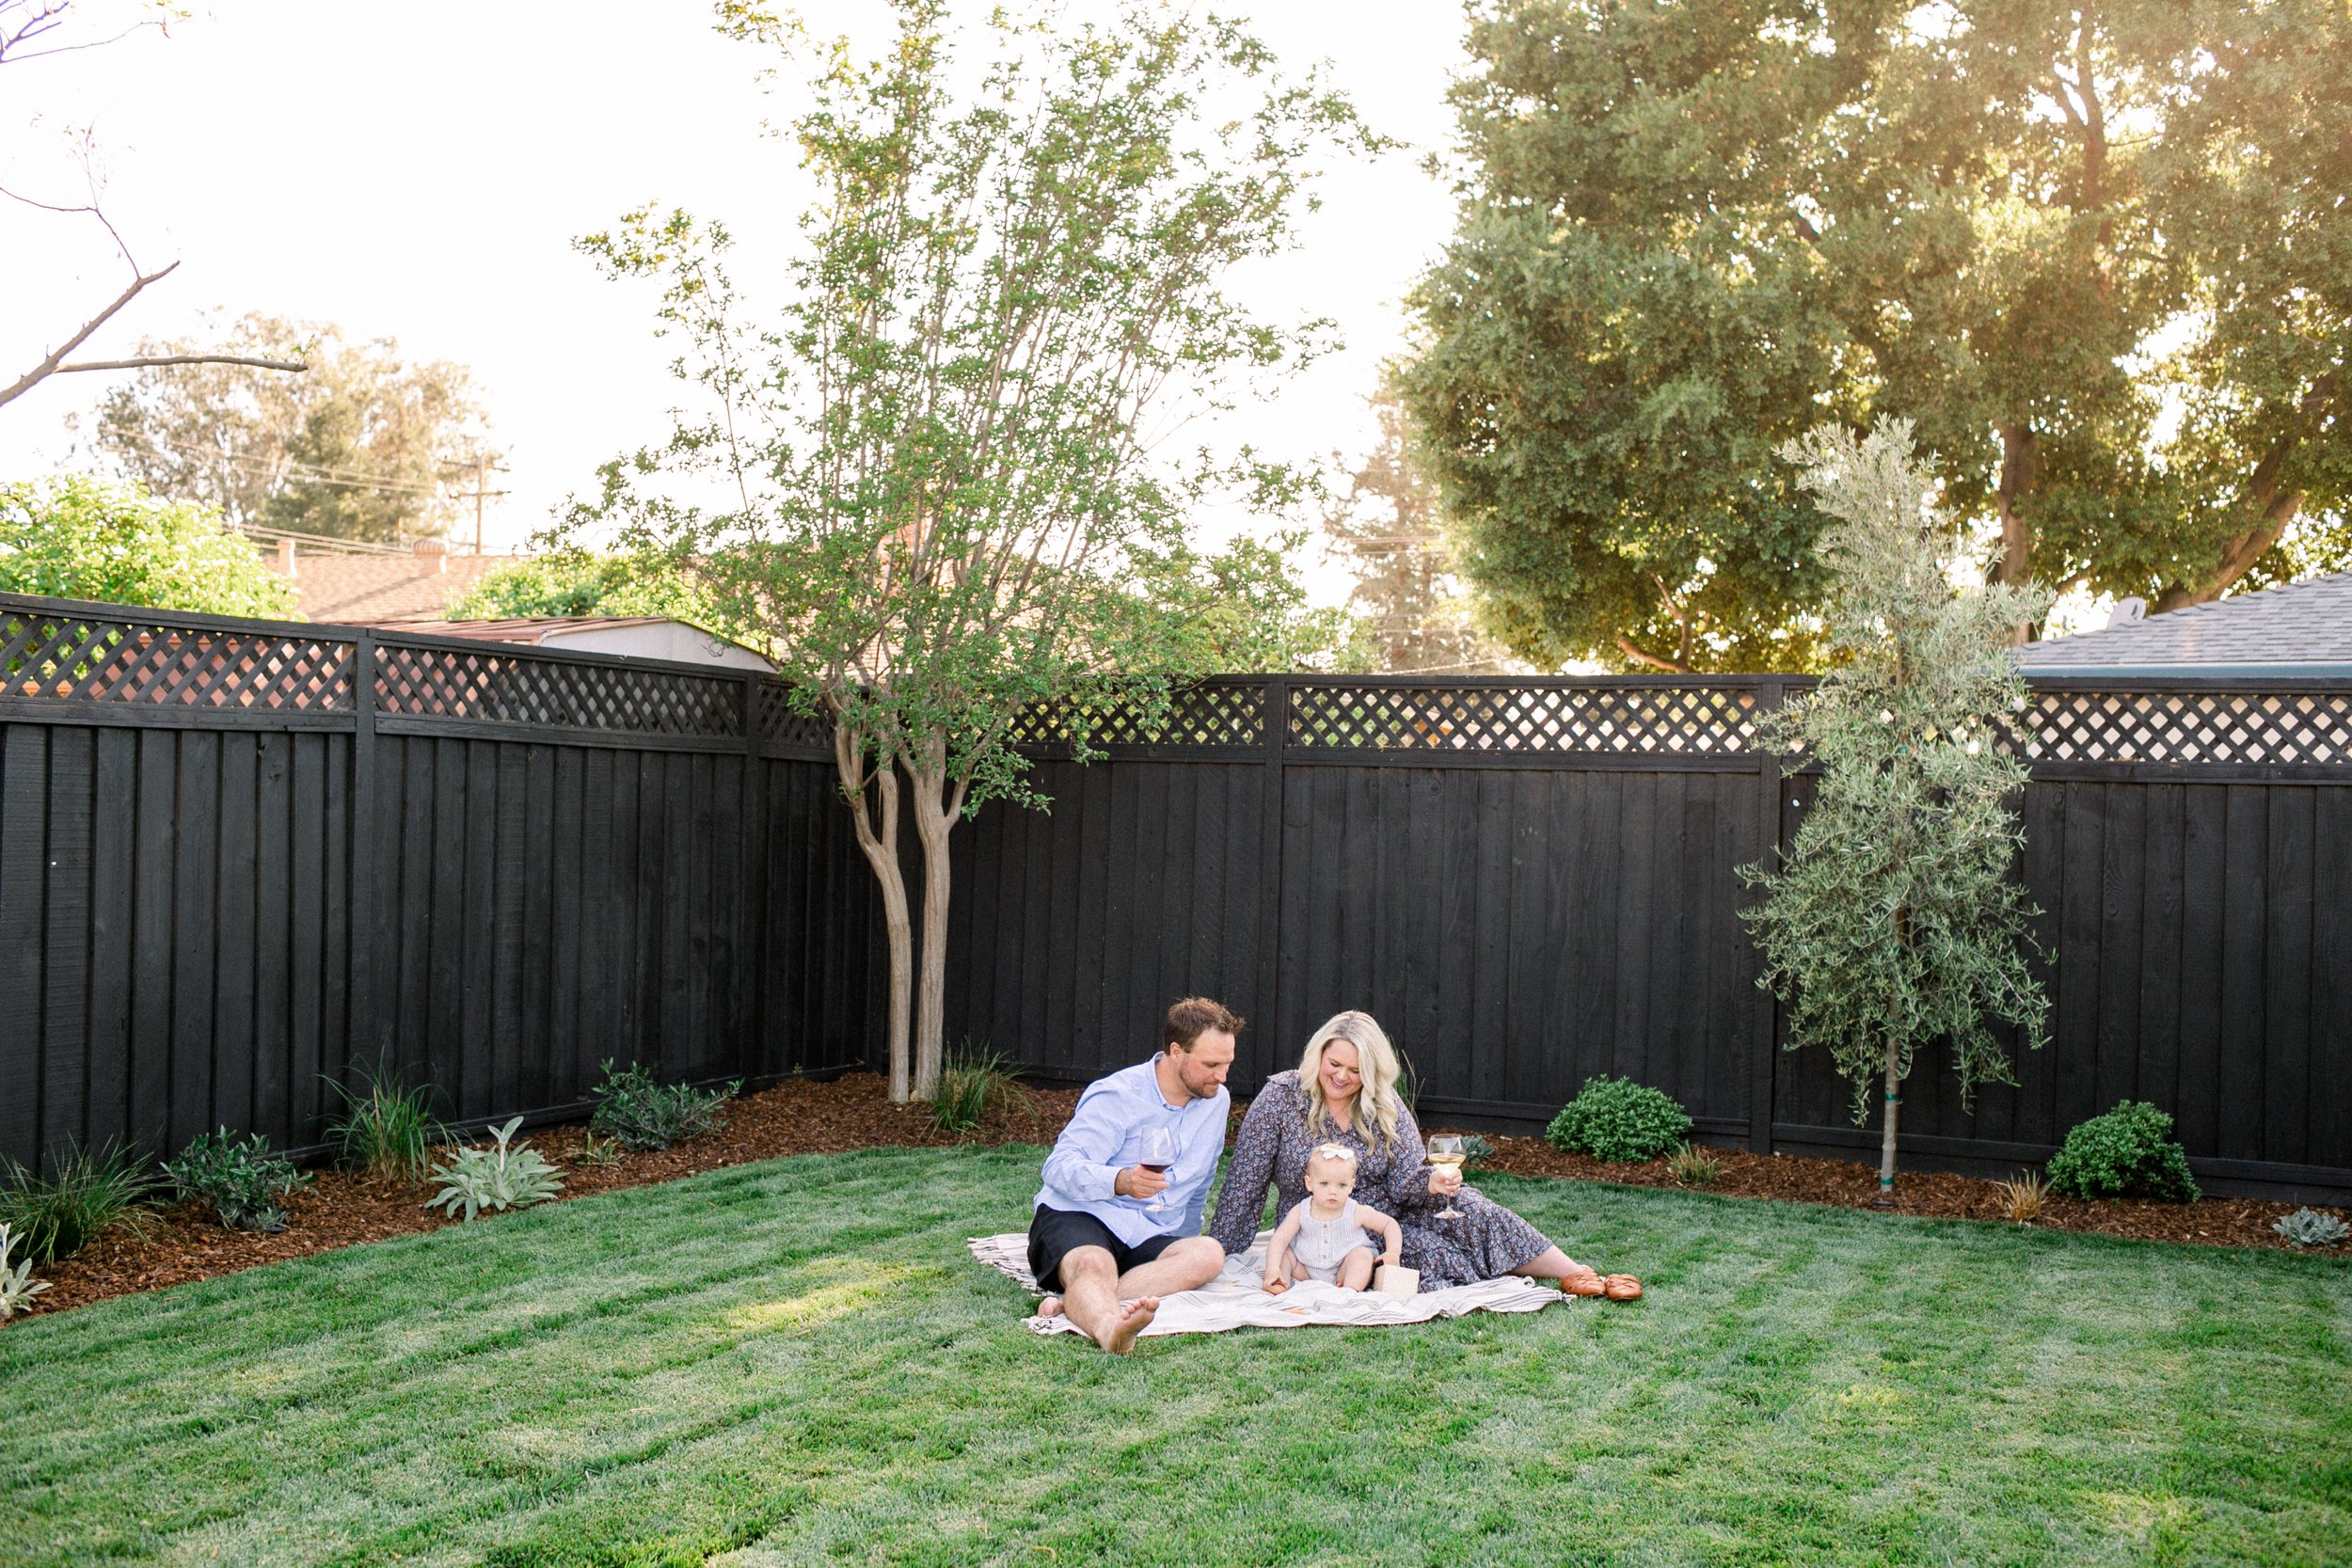 A family of 3 sitting on a lawn in a fenced yard with plants